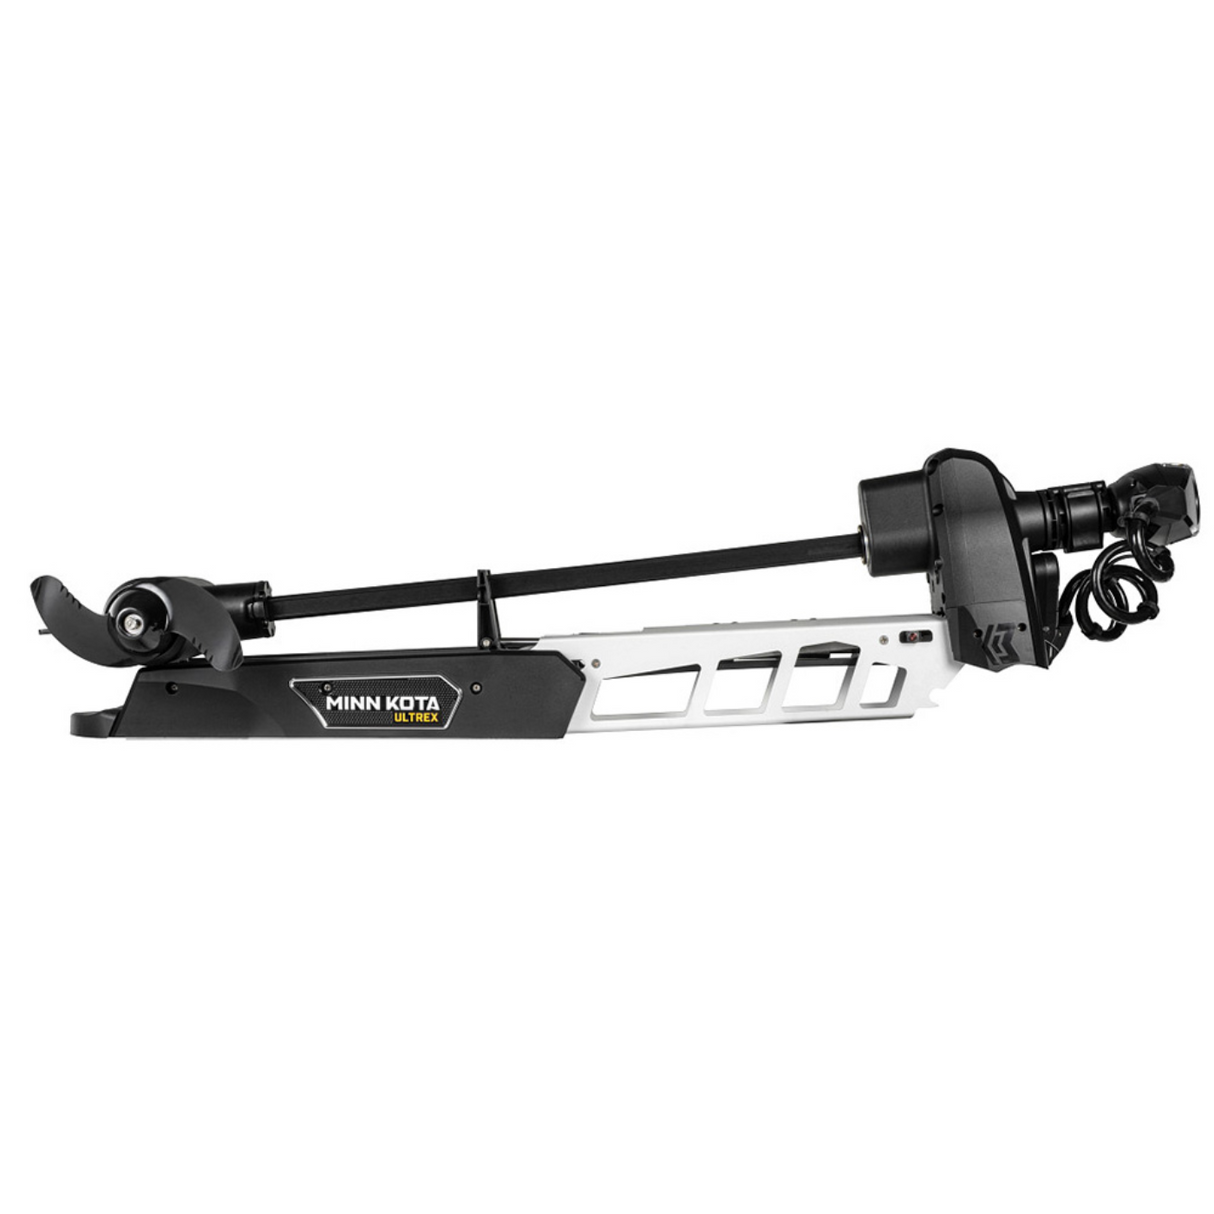 Ultrex Quest™ 90/115 Trolling Motor with Remote - Mega Down/Side Imaging - 45 in.